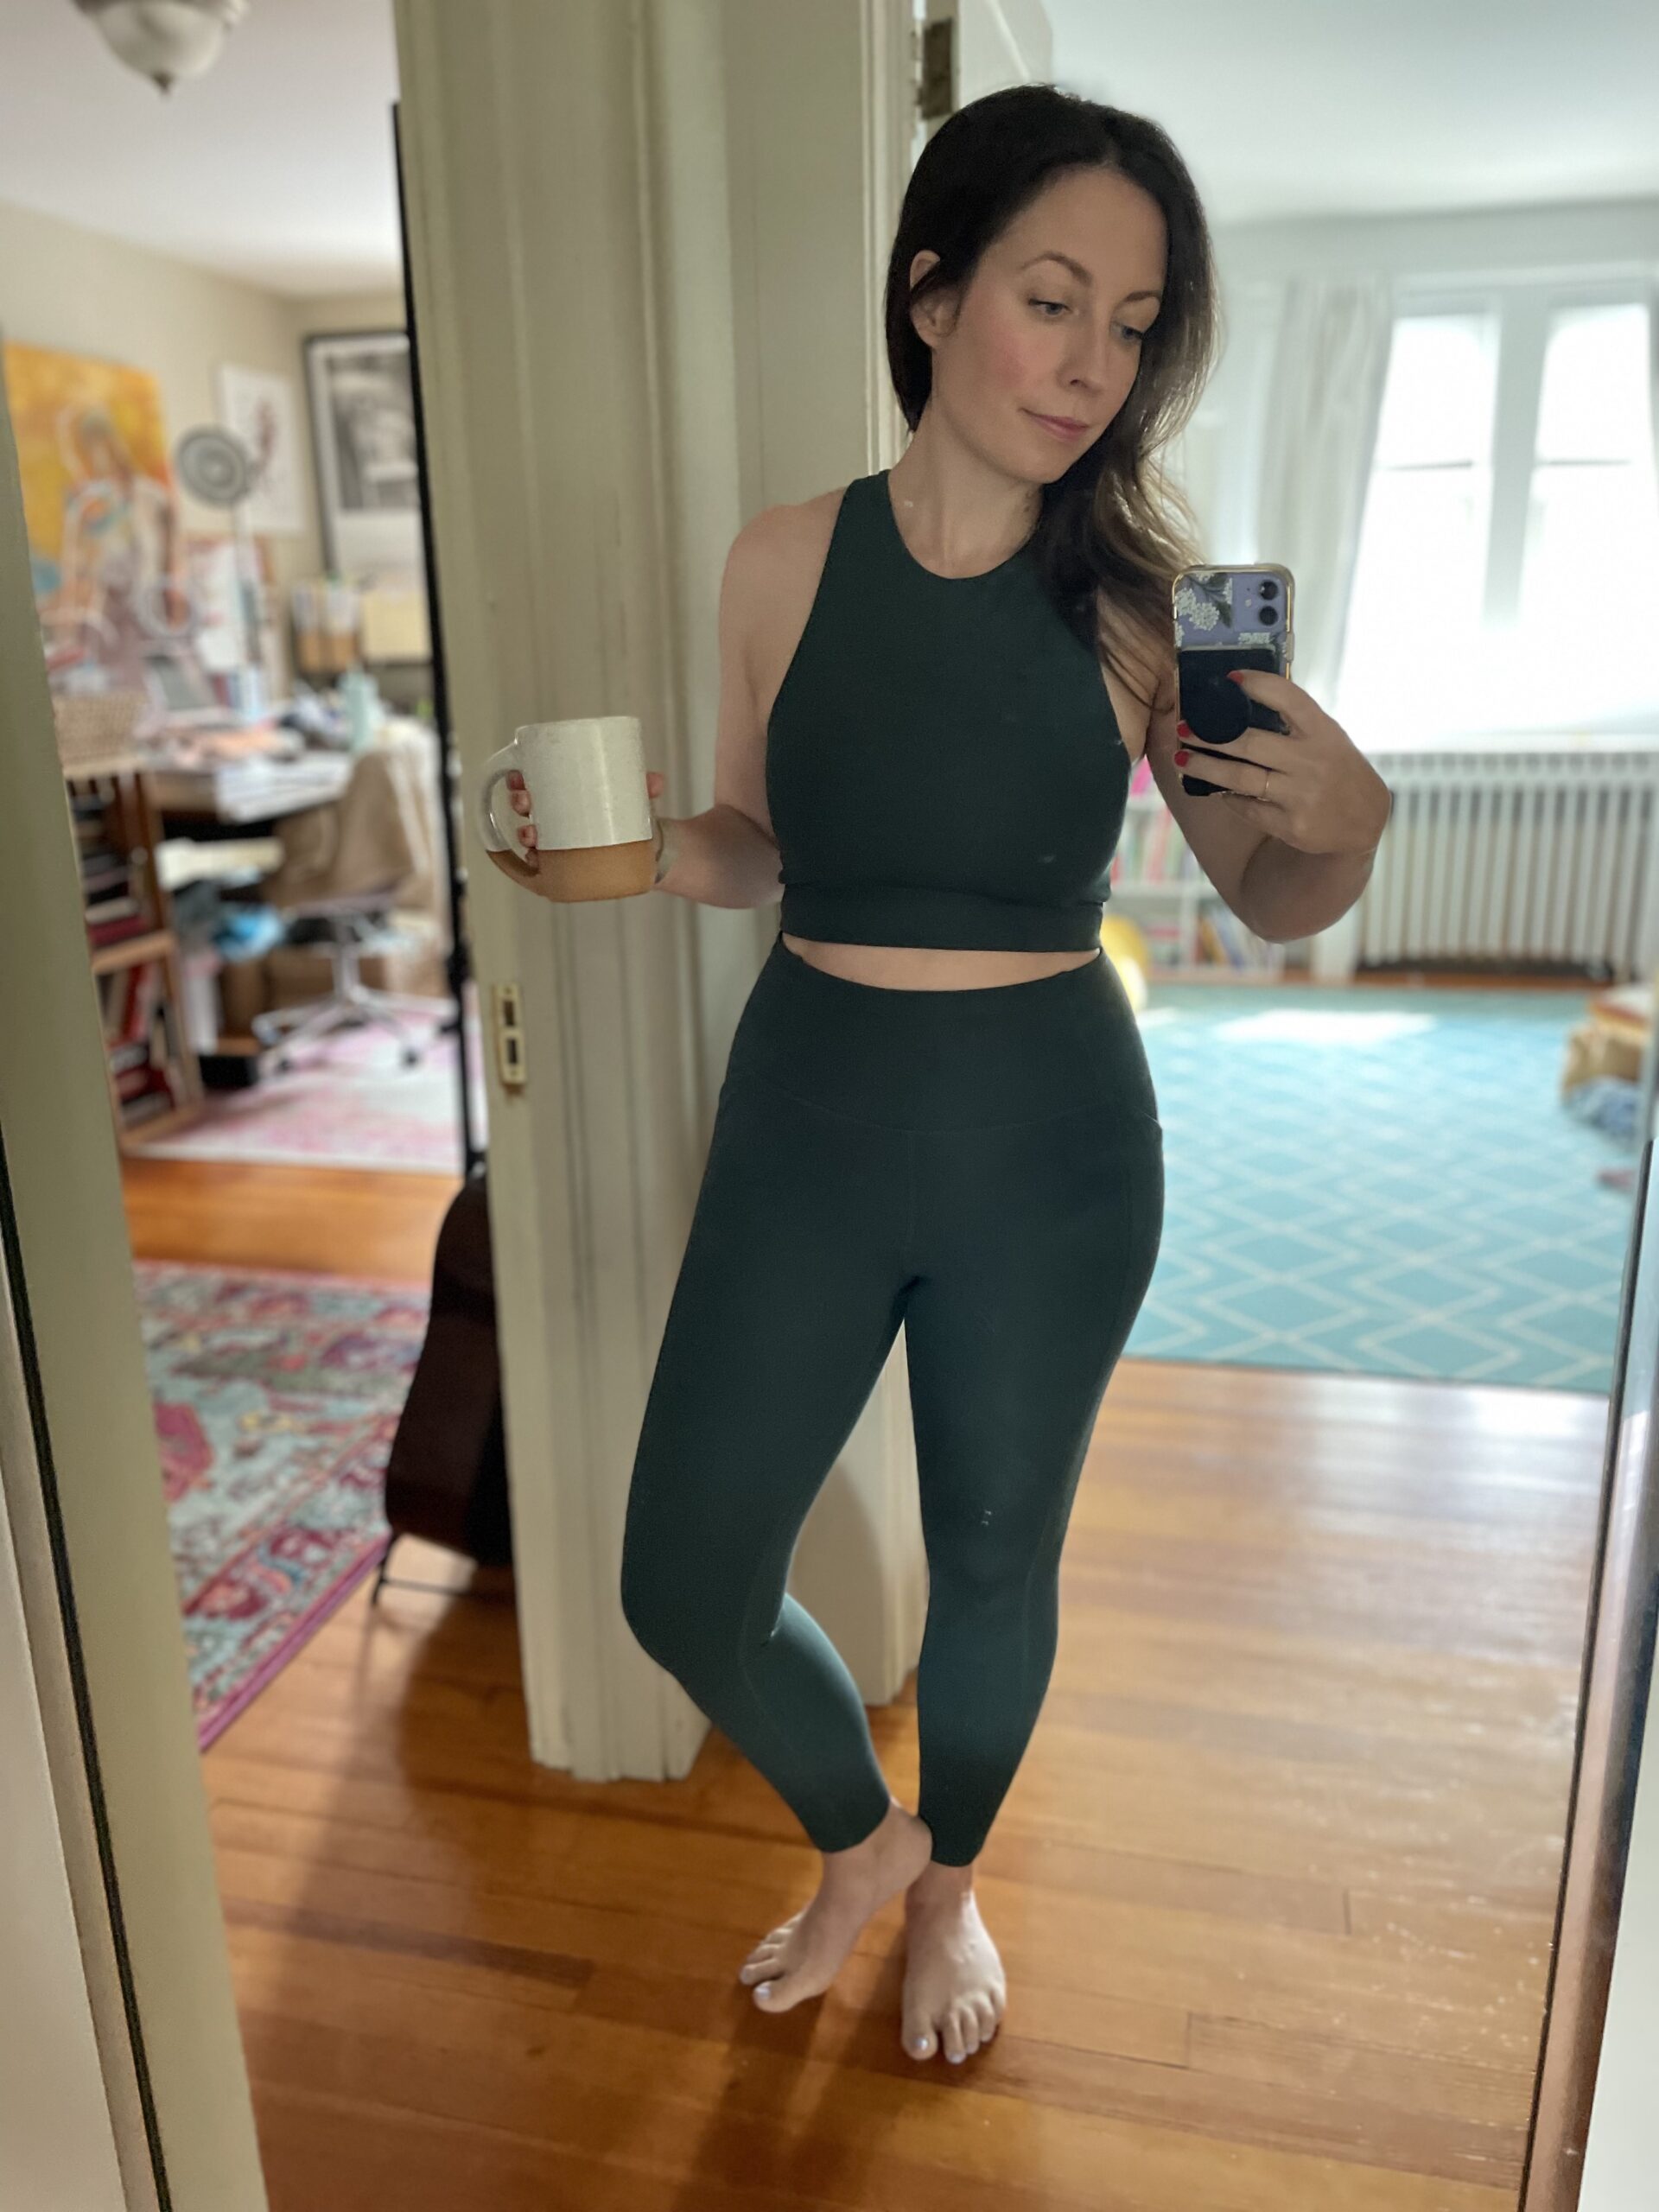 Girlfriend Collective Women's Yoga Clothing